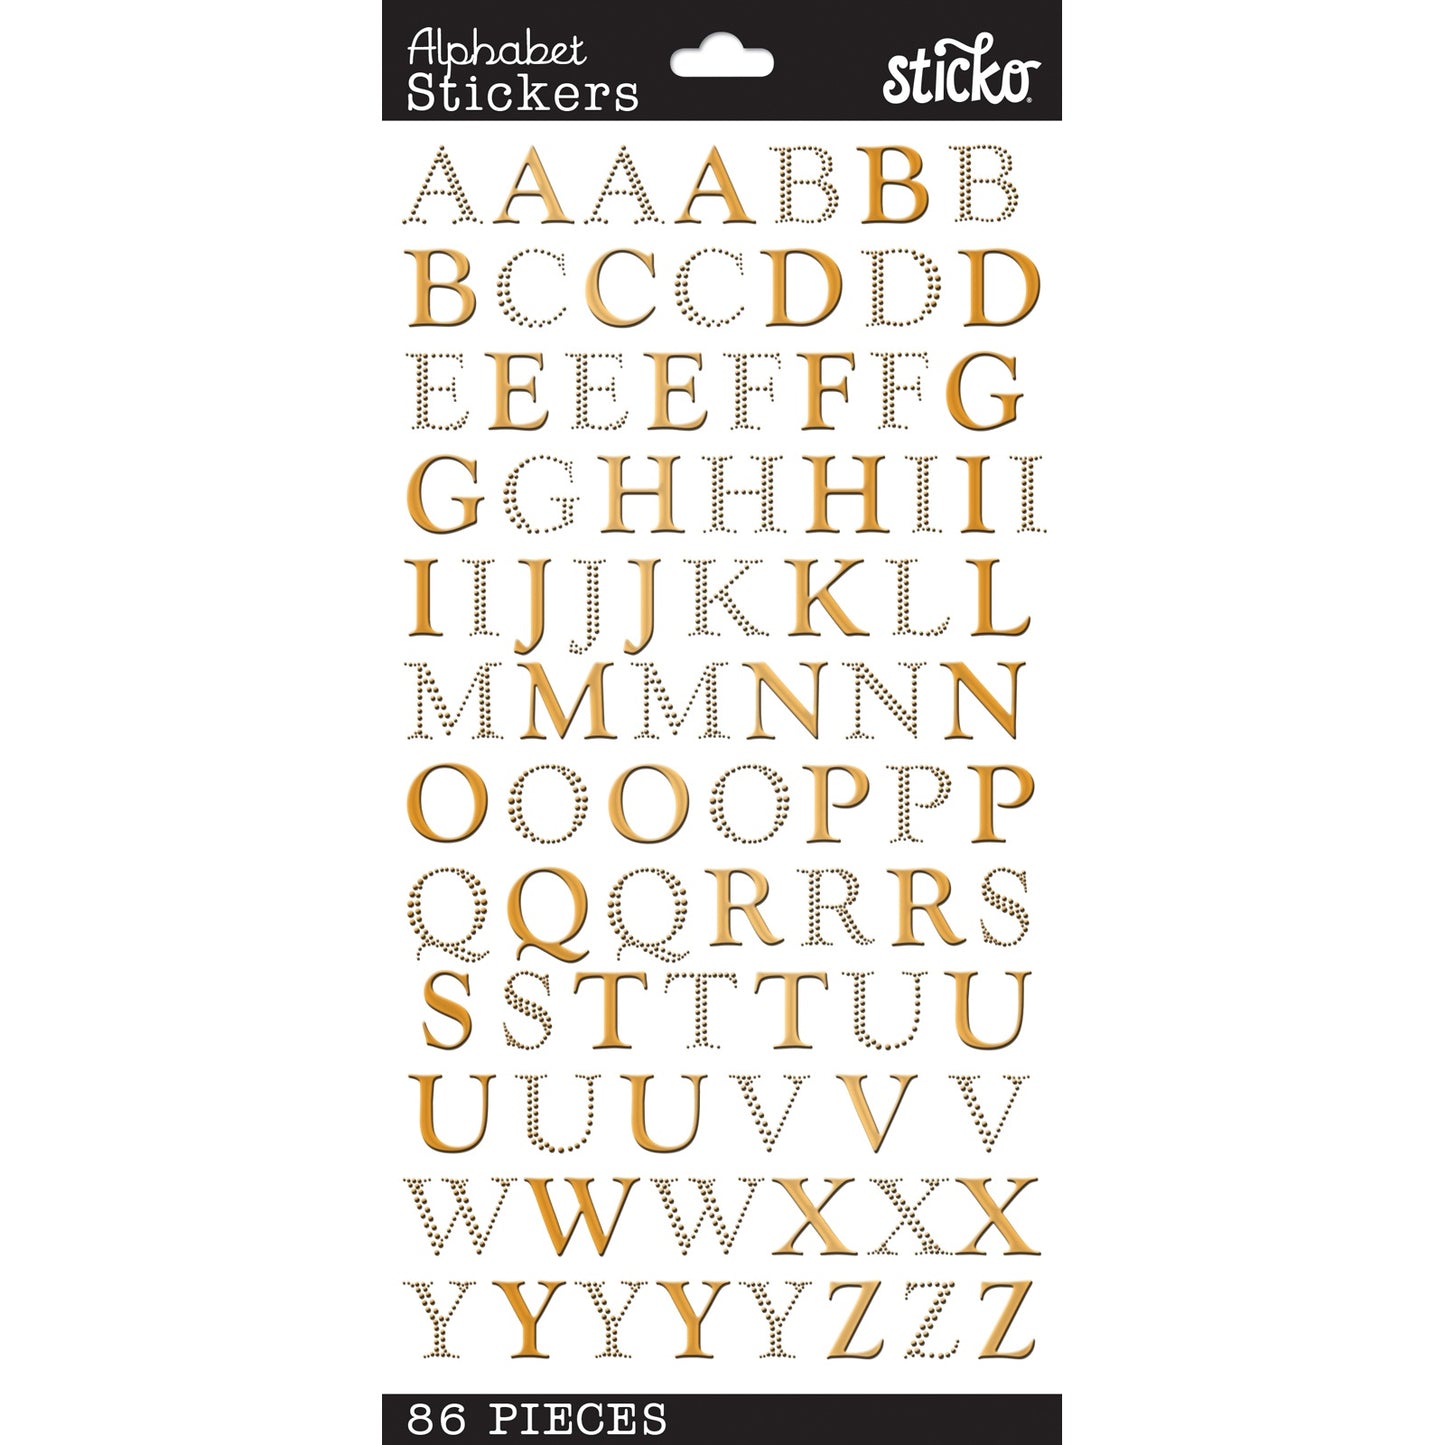 Franklin Alphabet Stickers, Gold Foil, 5 3/4 inches, 42 Stickers